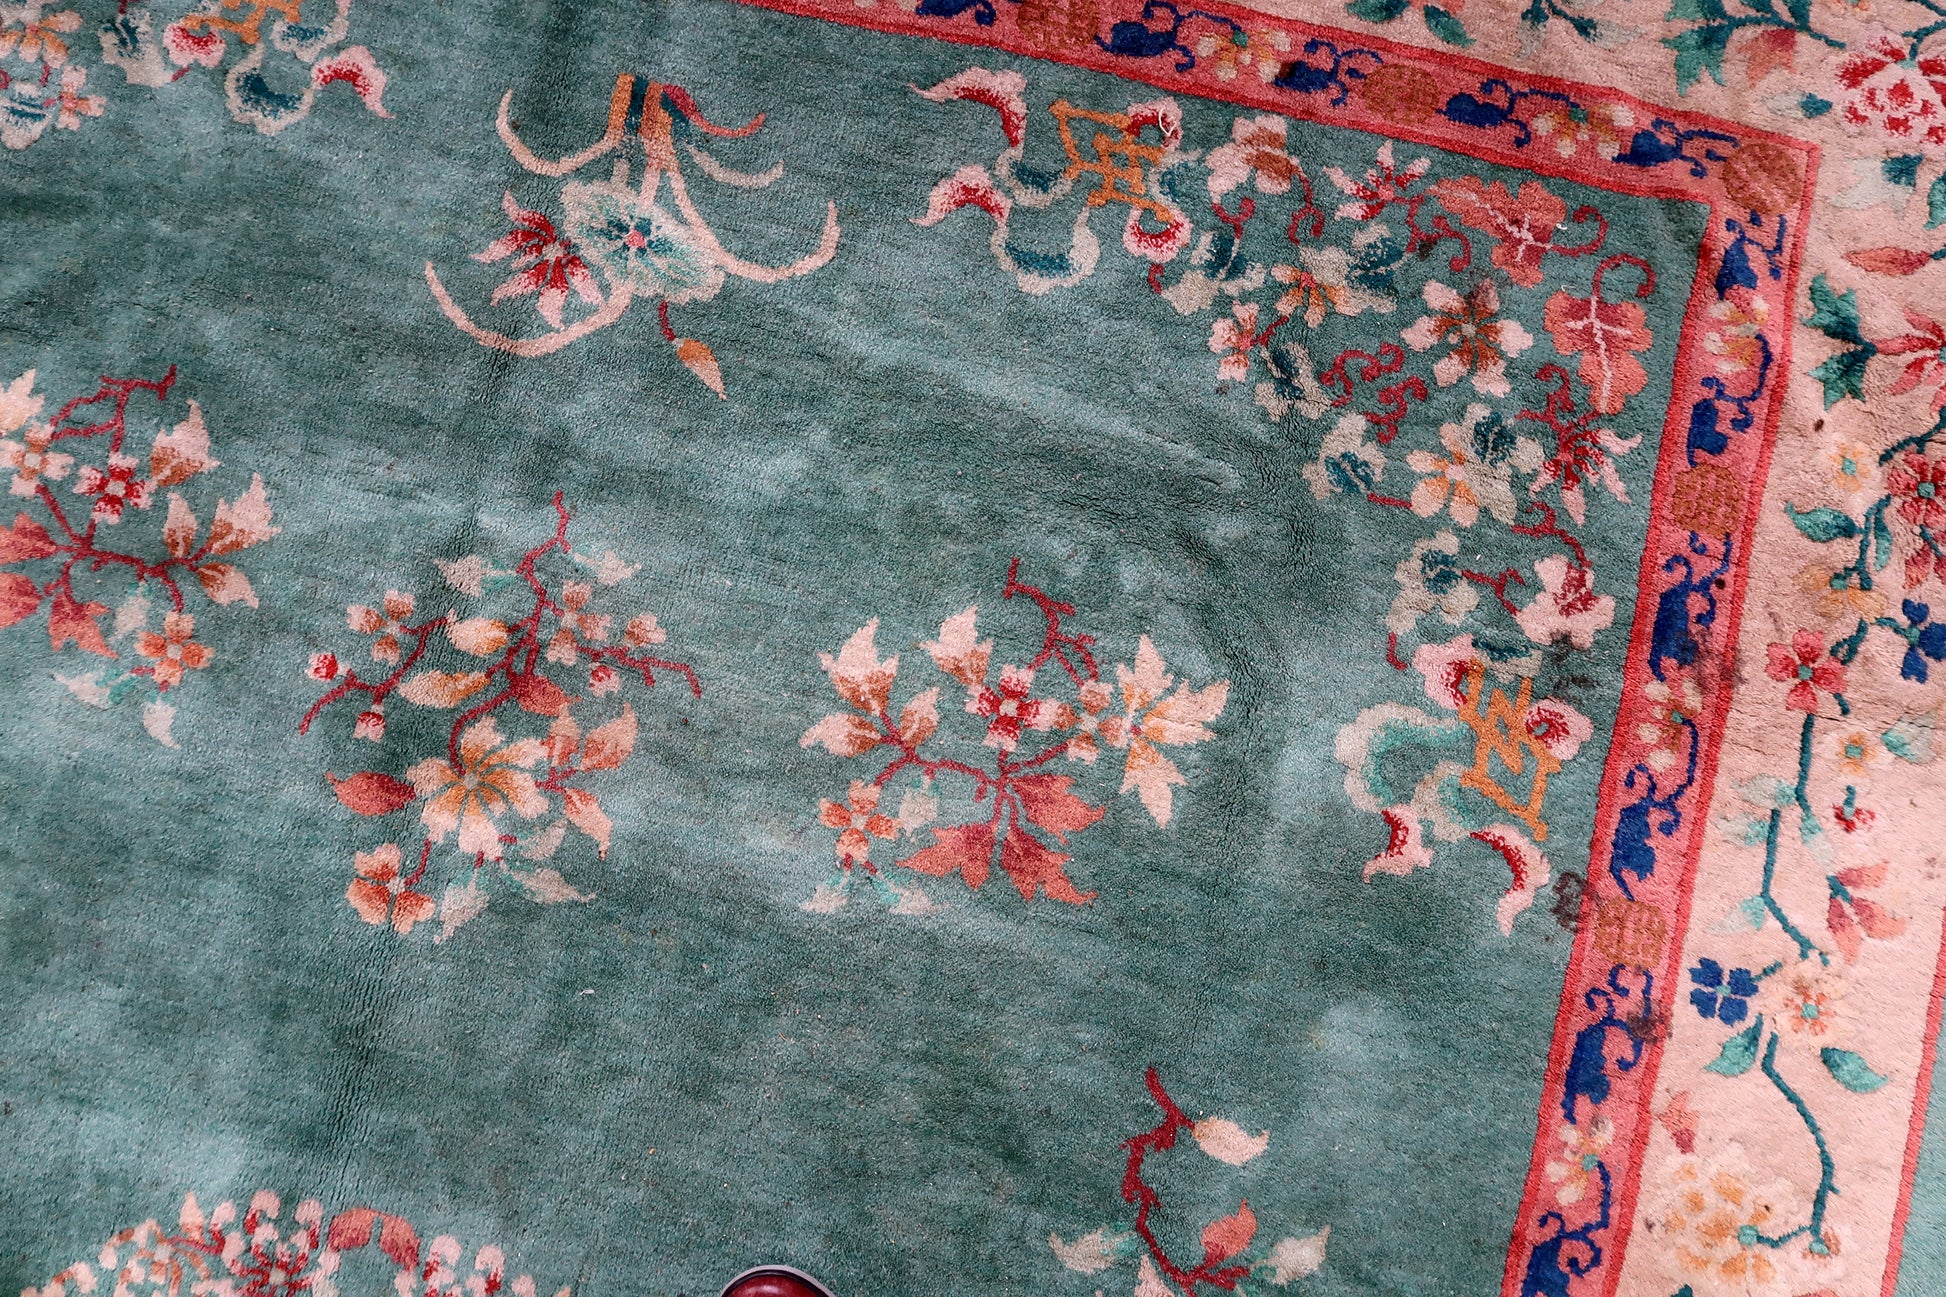 Intricate floral elements on the rug.